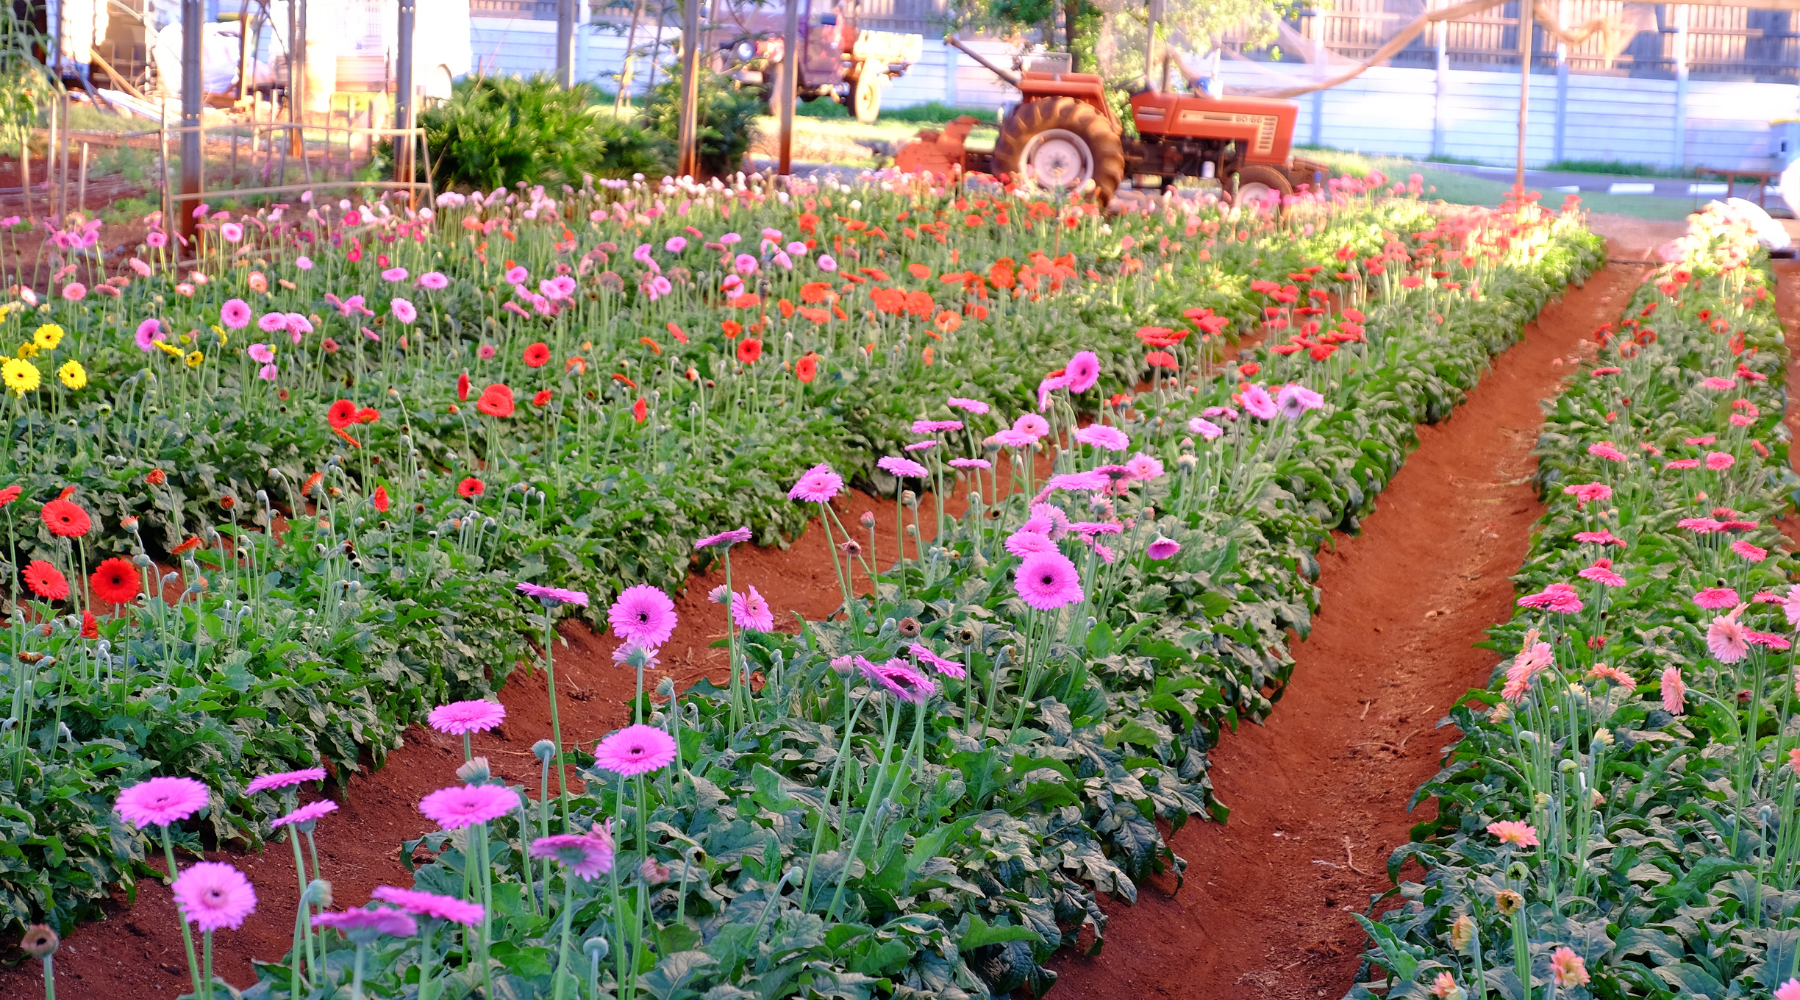 Rows of blooms with paths between on the flower farm